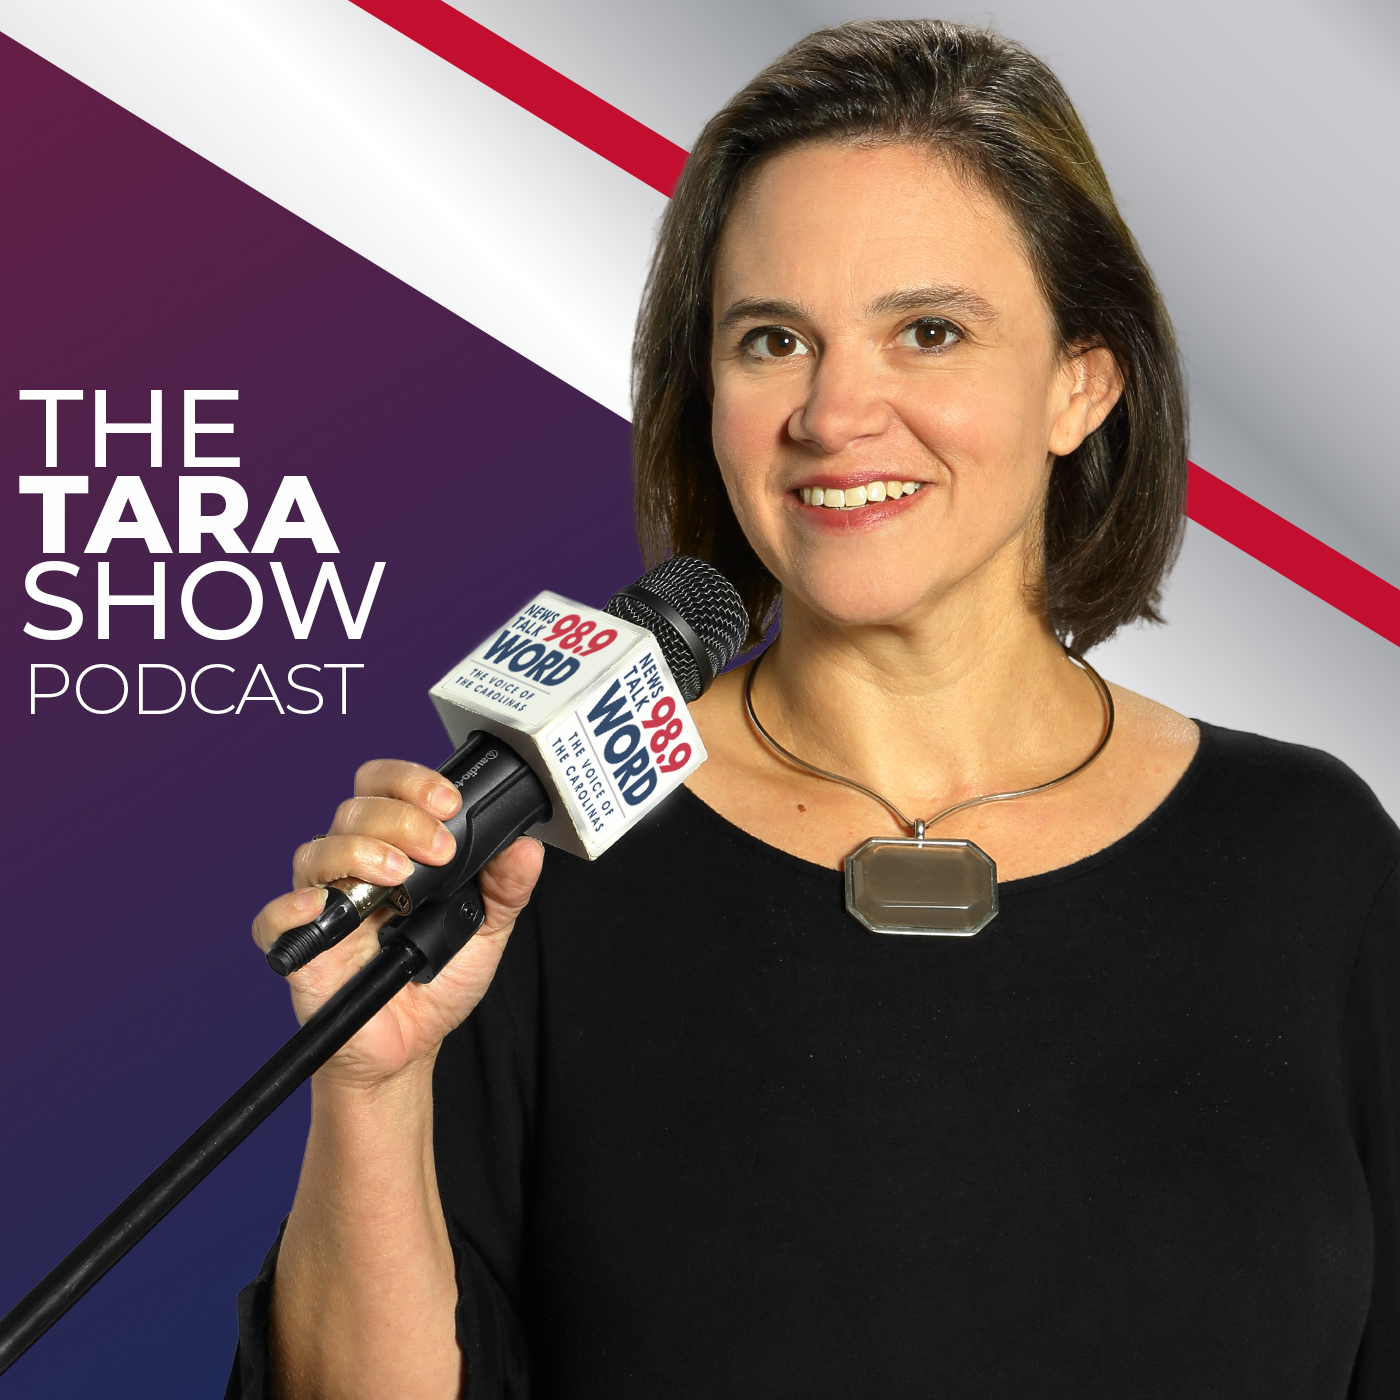 Hour 3: The Tara Show - “Following the Bloomberg Money Trail” “Burns vs Biggs - Who is the Better Choice?” “The Roads Mysteriously NEVER get Fixed” “The Party's Final and most Vital Rule”